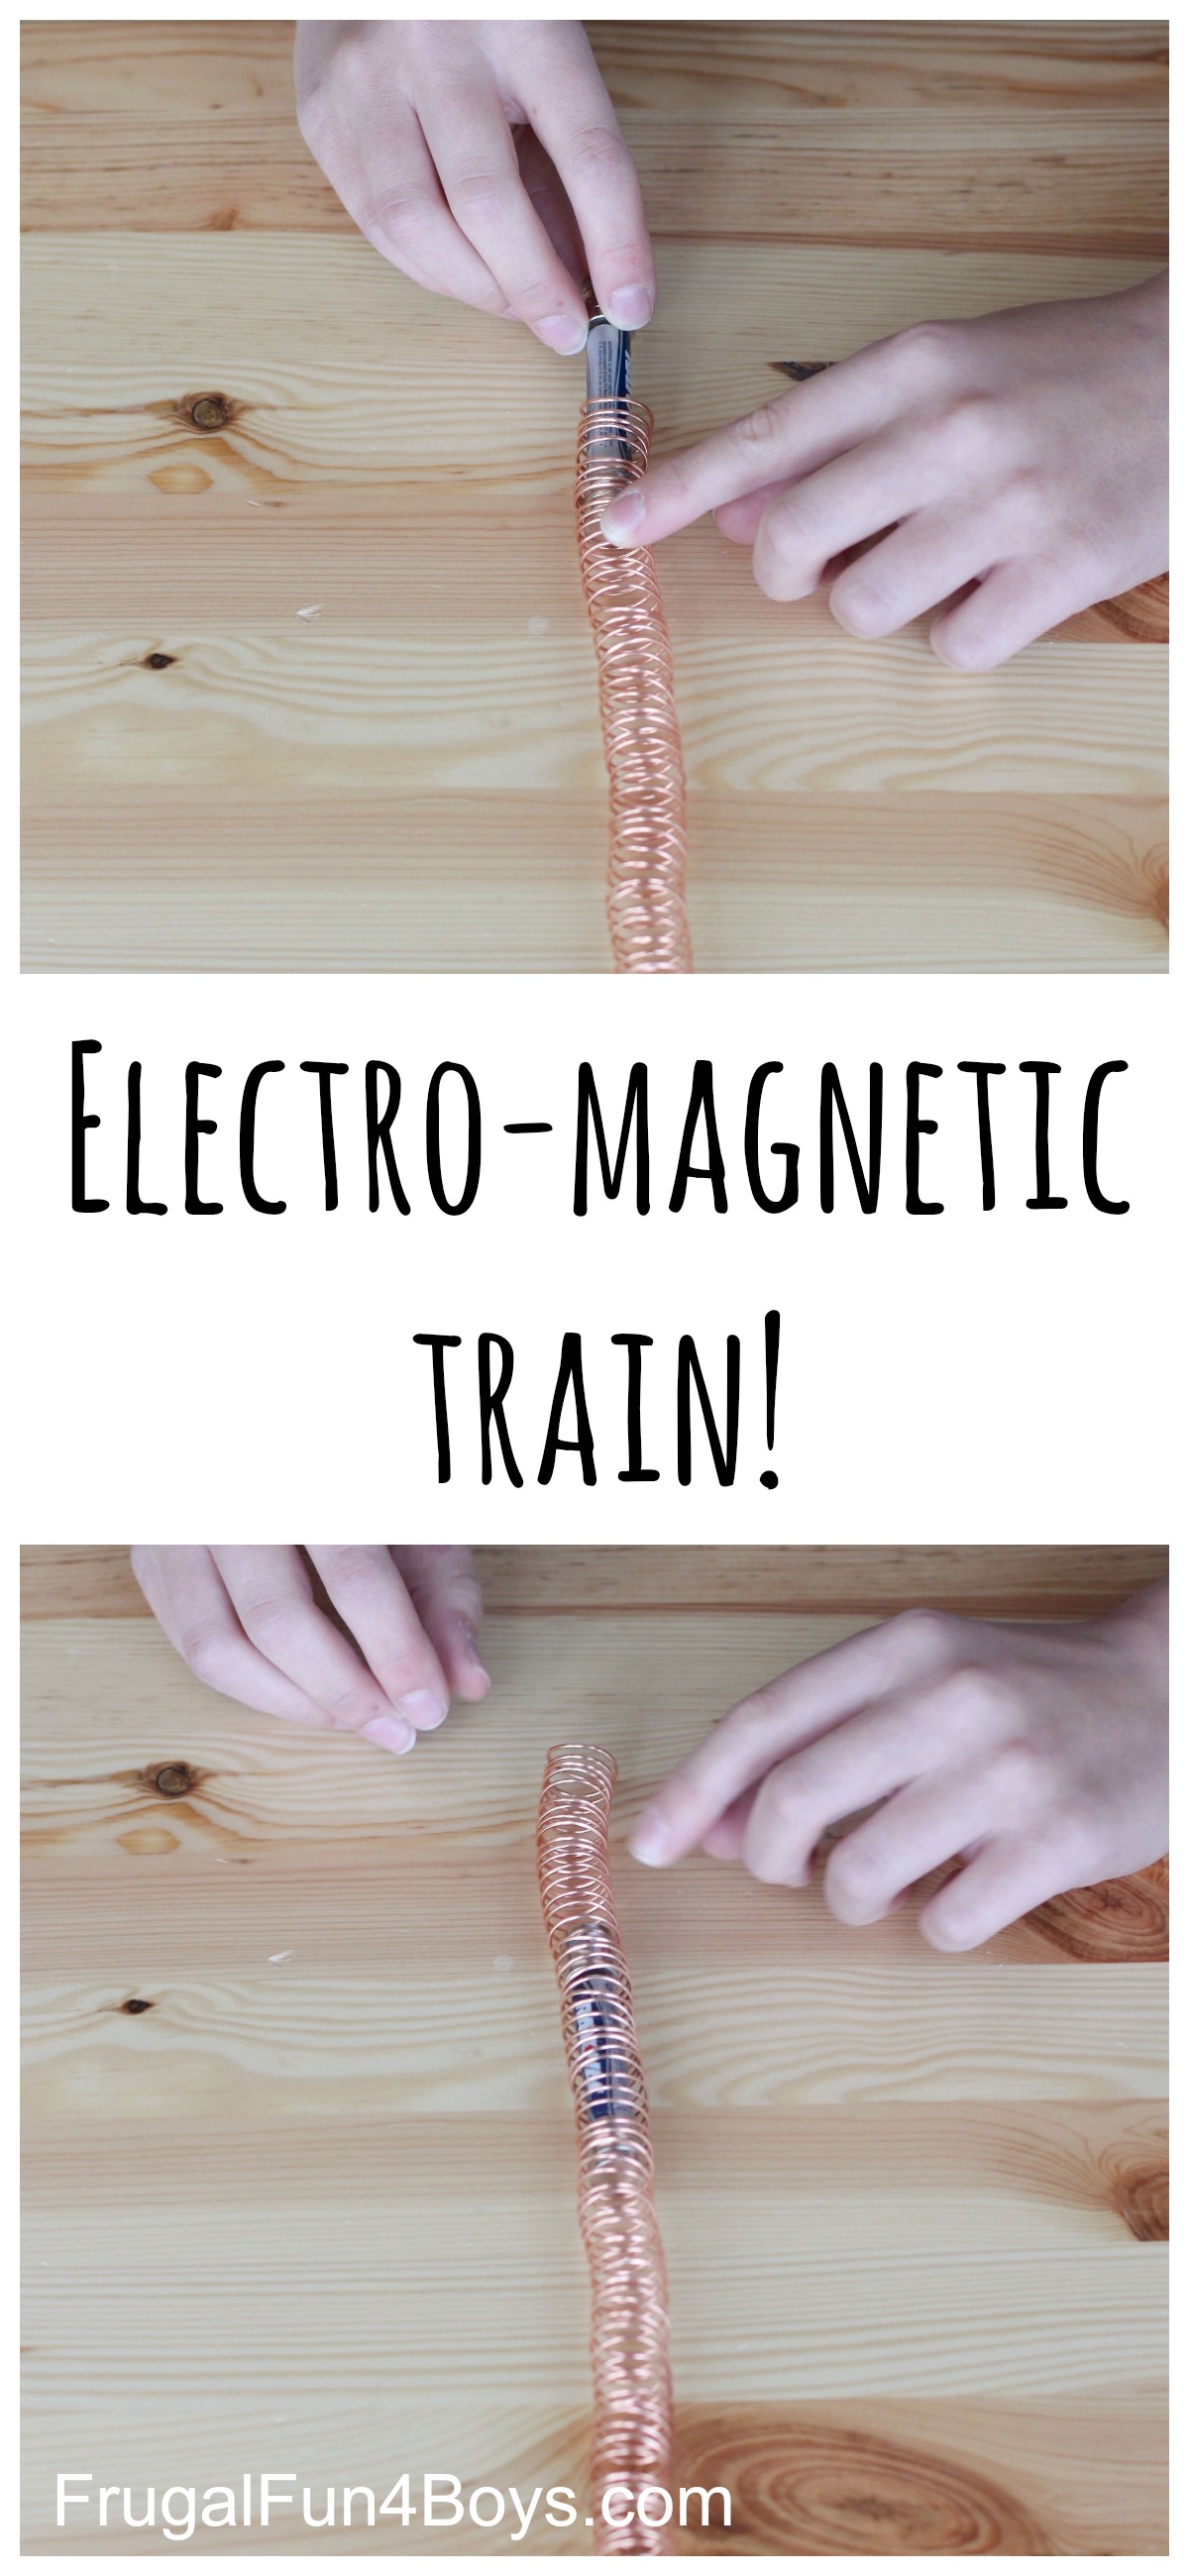 How to Build a Simple Electro-Magnetic Train